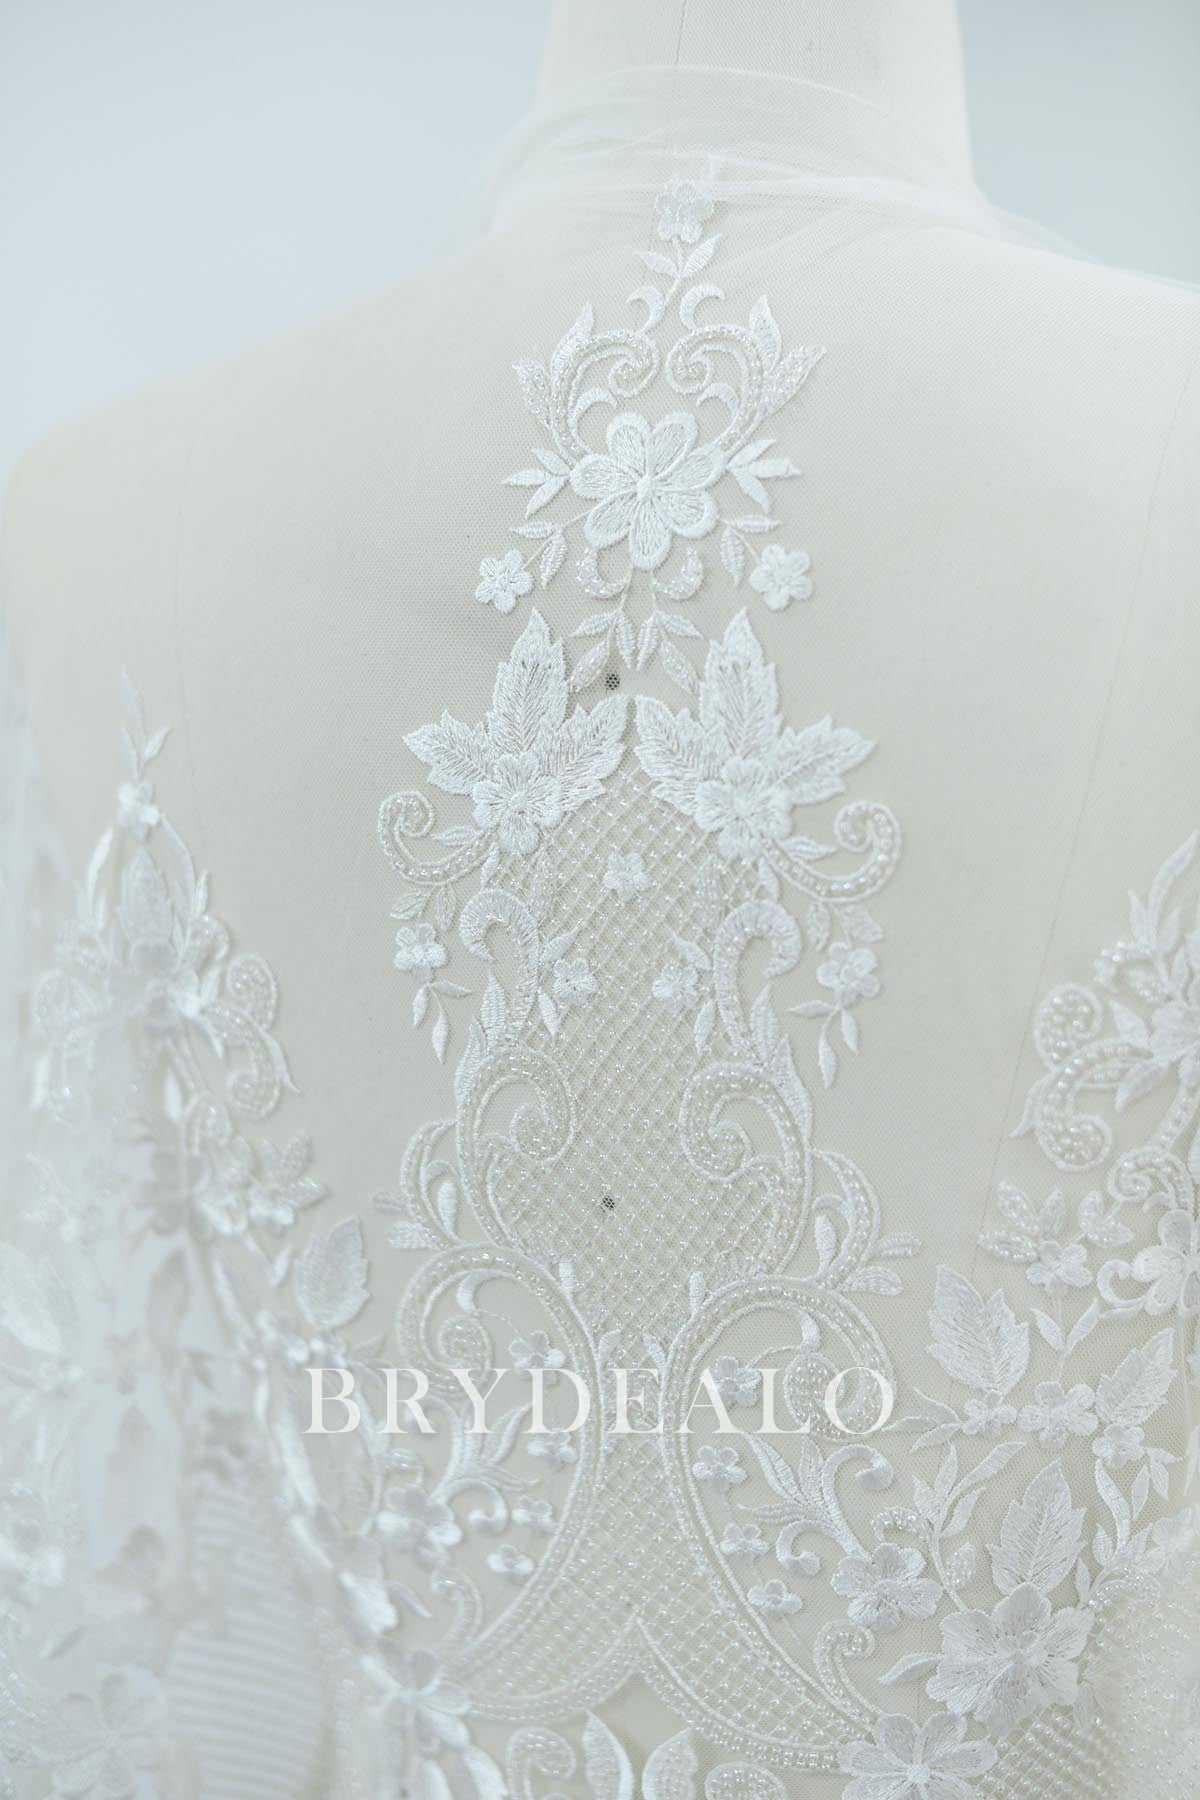  Floral Embroidered Bridal Lace Fabric